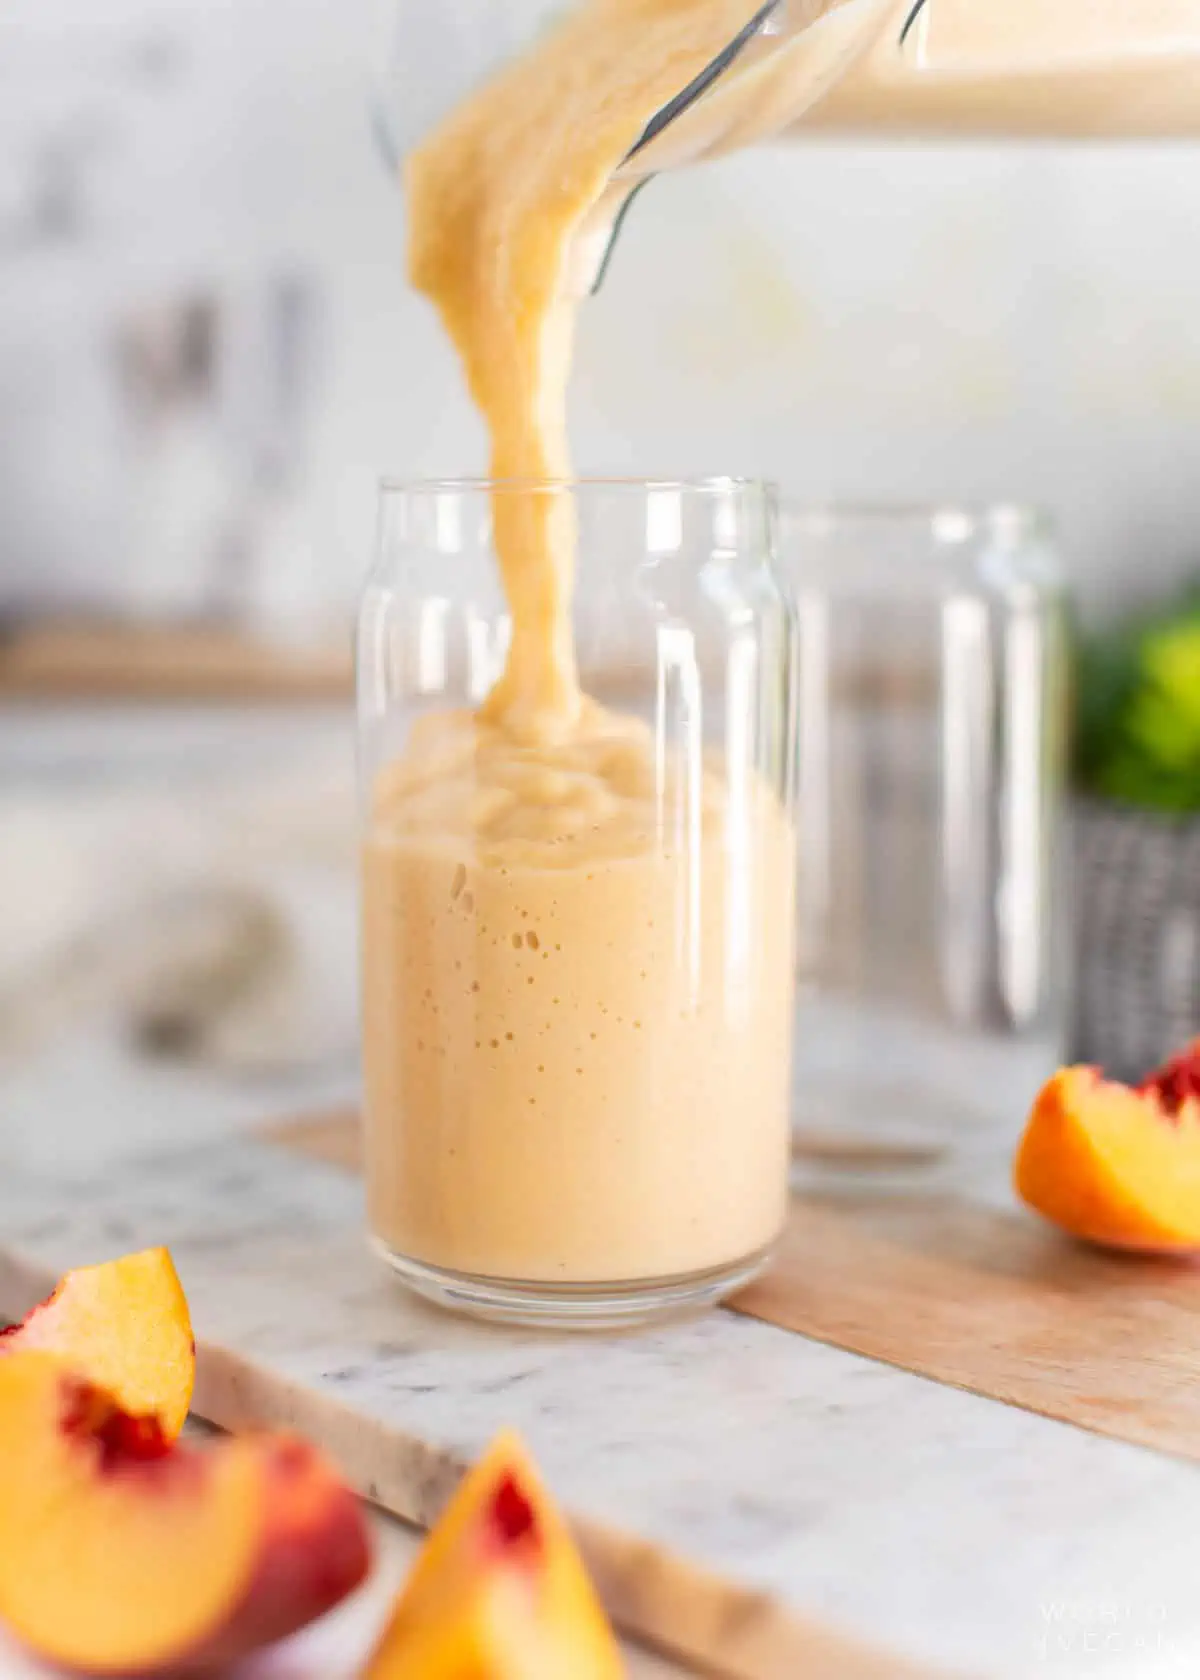 Pouring the peach and banana smoothie into a glass.